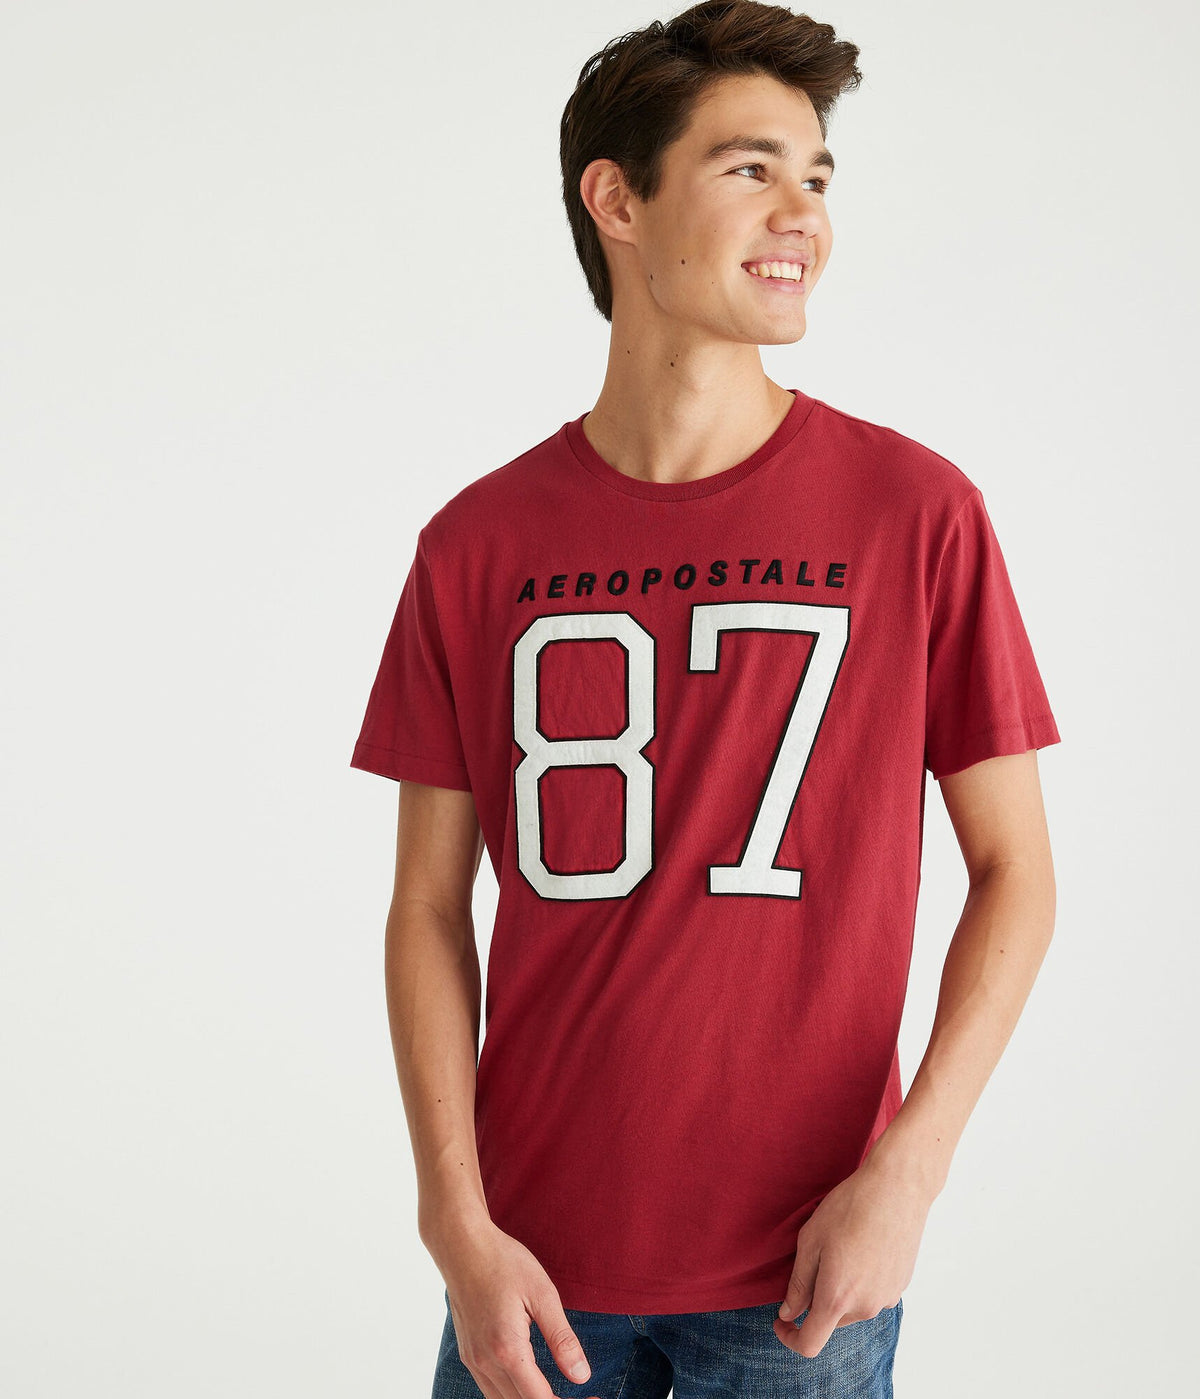 Aeropostale Mens' Aeropostale Large 87 Applique Graphic Tee - Red - Size S - Cotton - Teen Fashion & Clothing Cerise Red